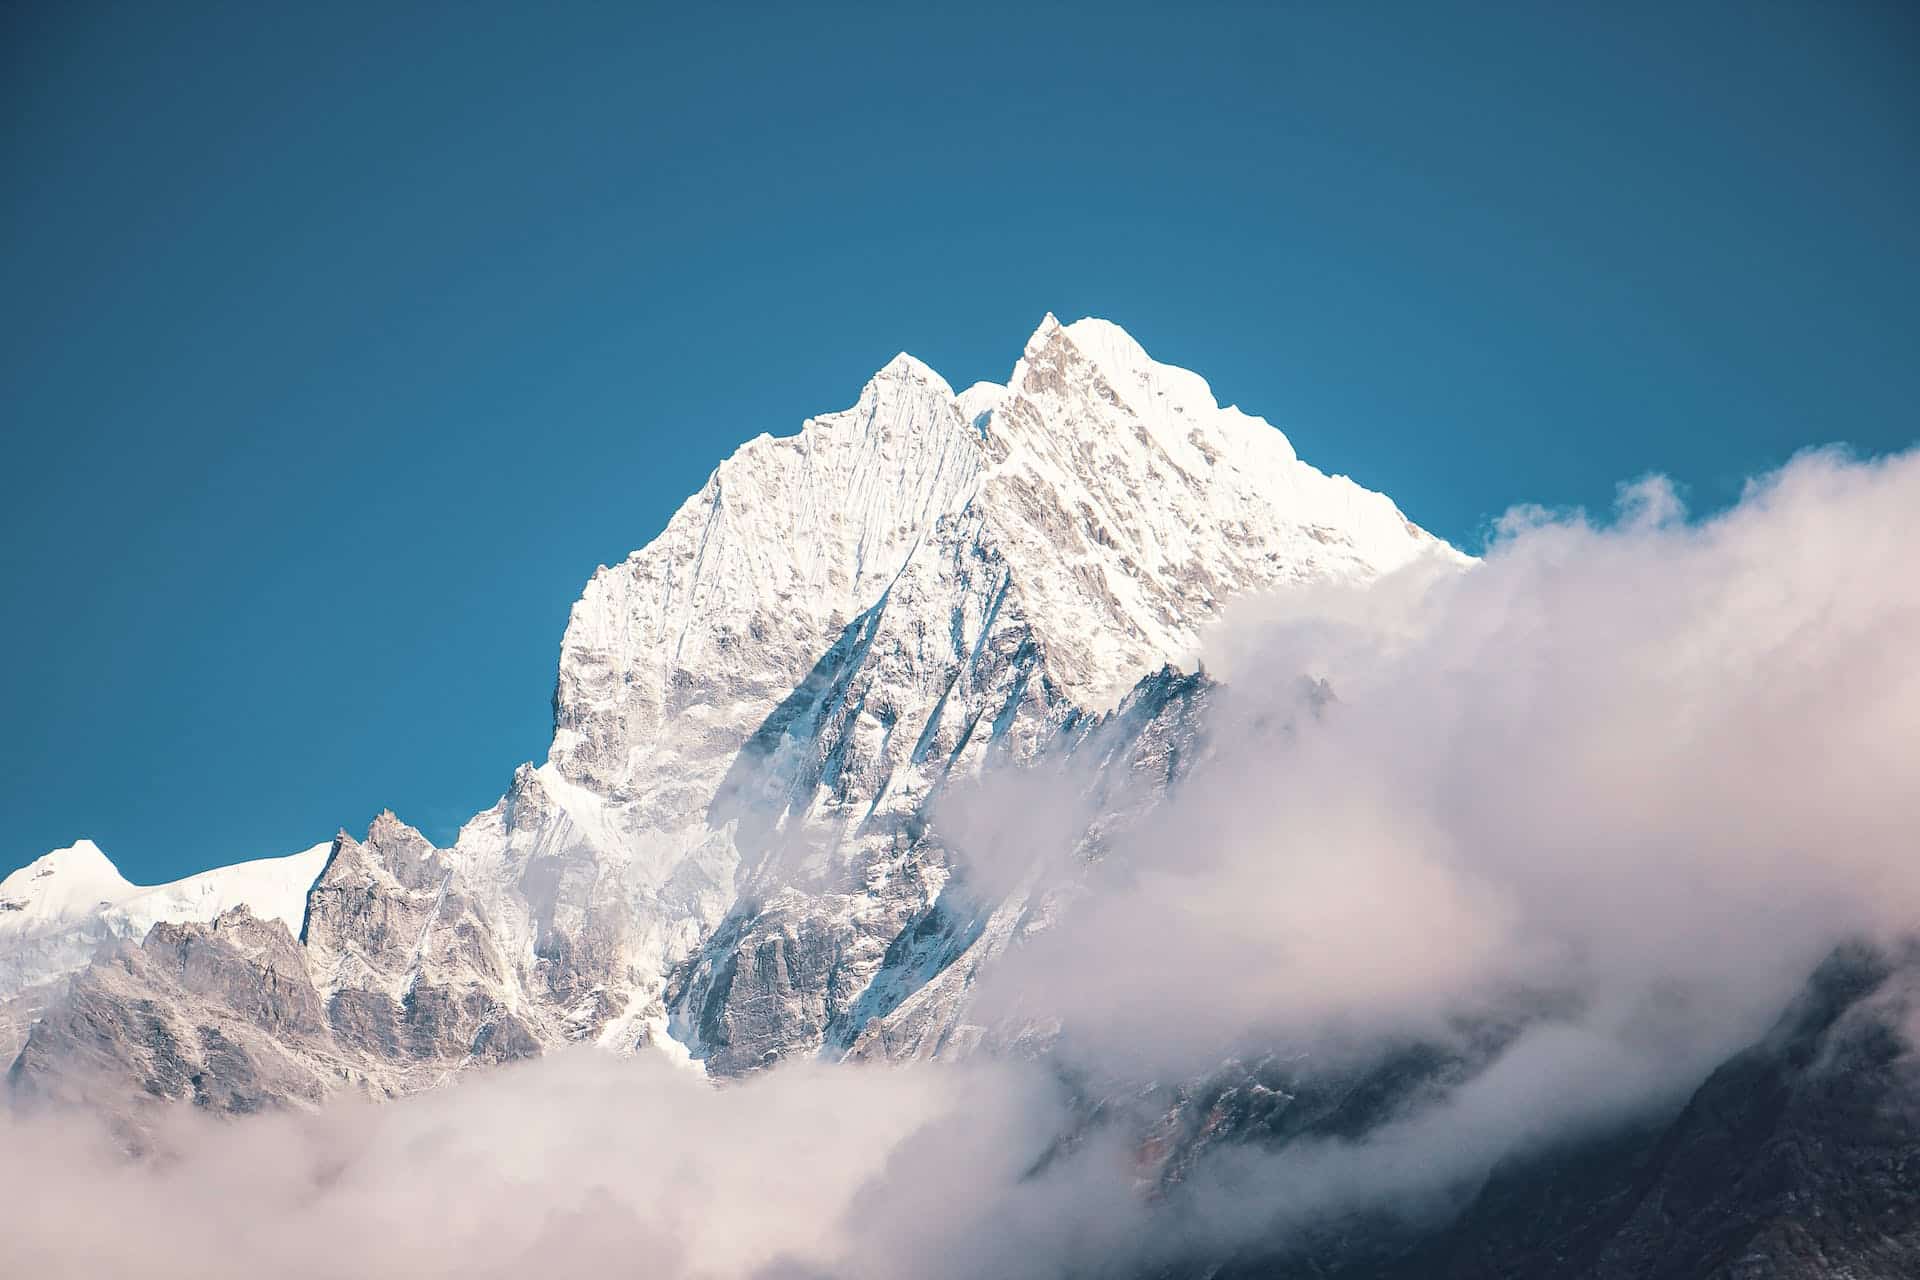 Mount Everest – The Ultimate Adult Playground